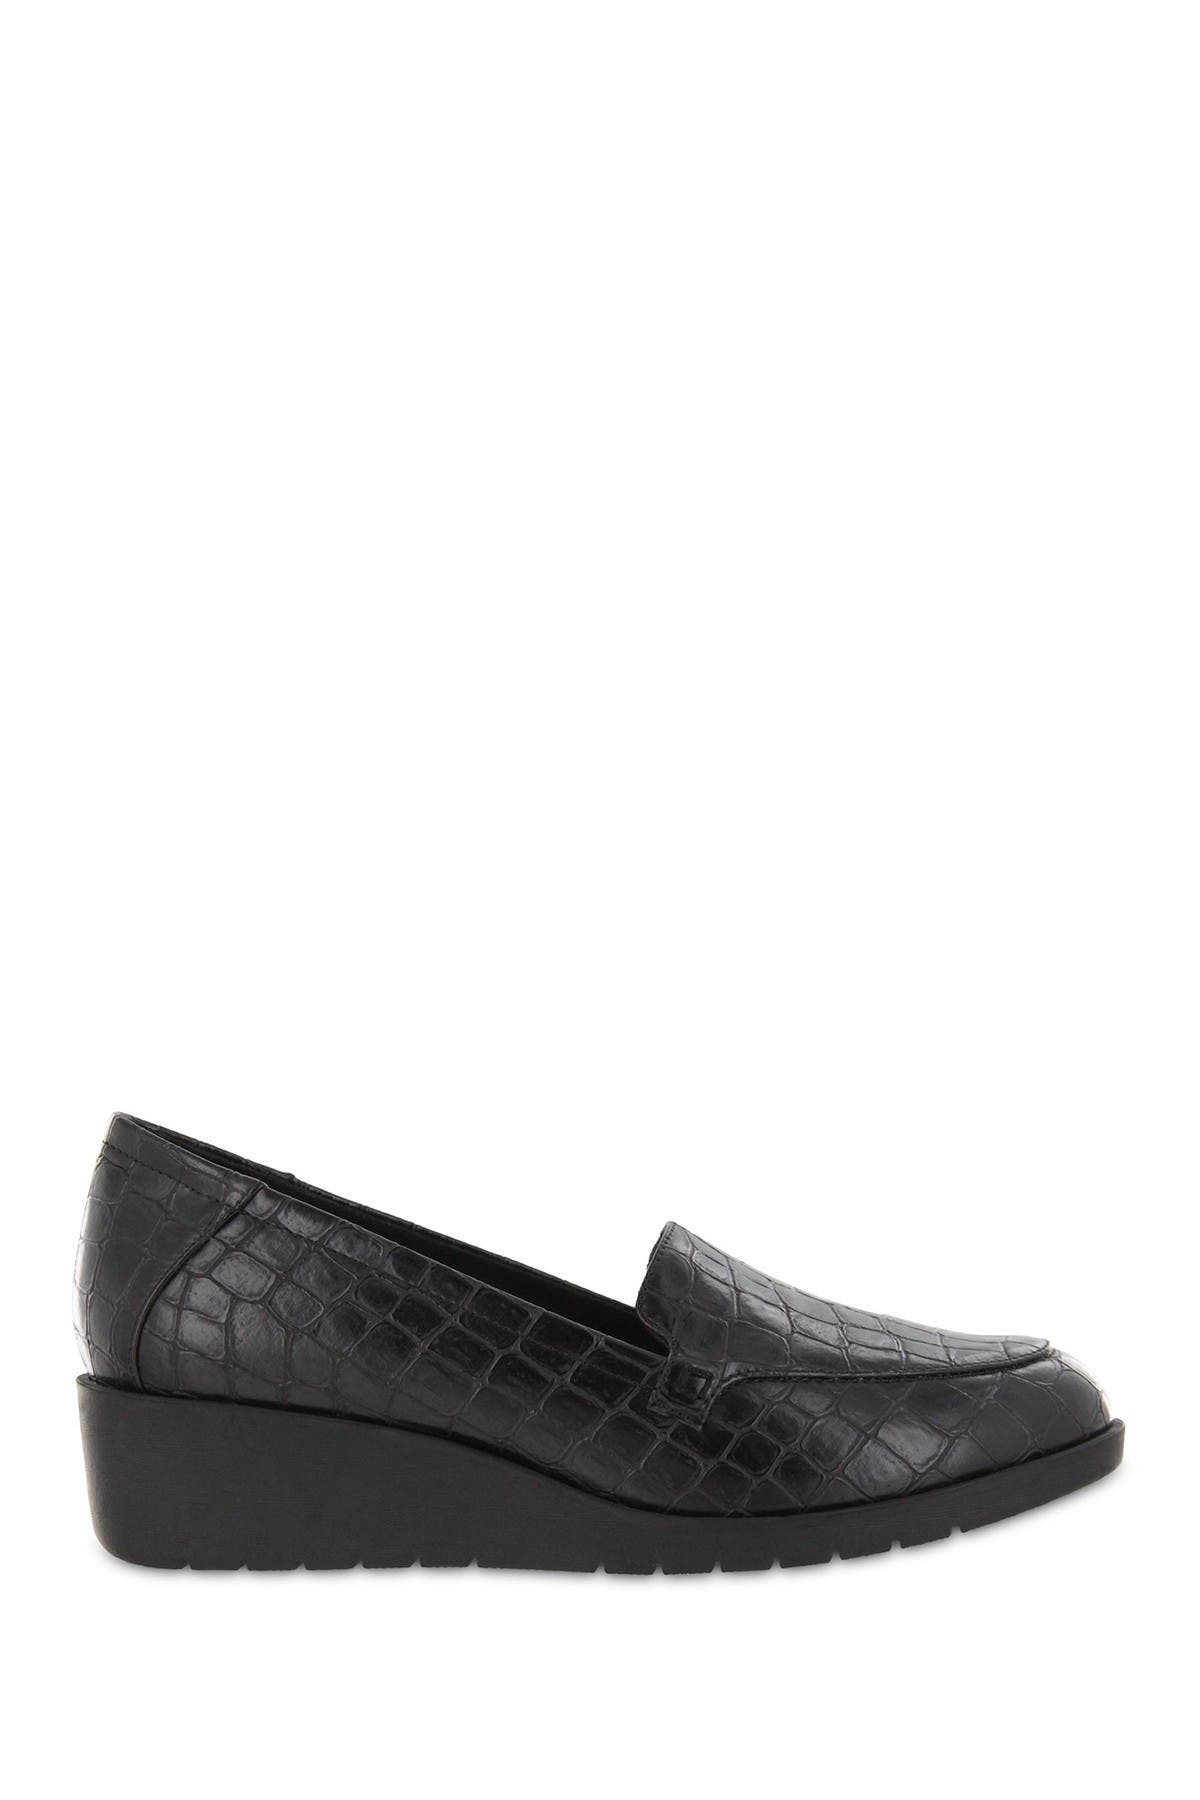 Mia Amore Katri Croc Embossed Wedge Loafer In Black | ModeSens